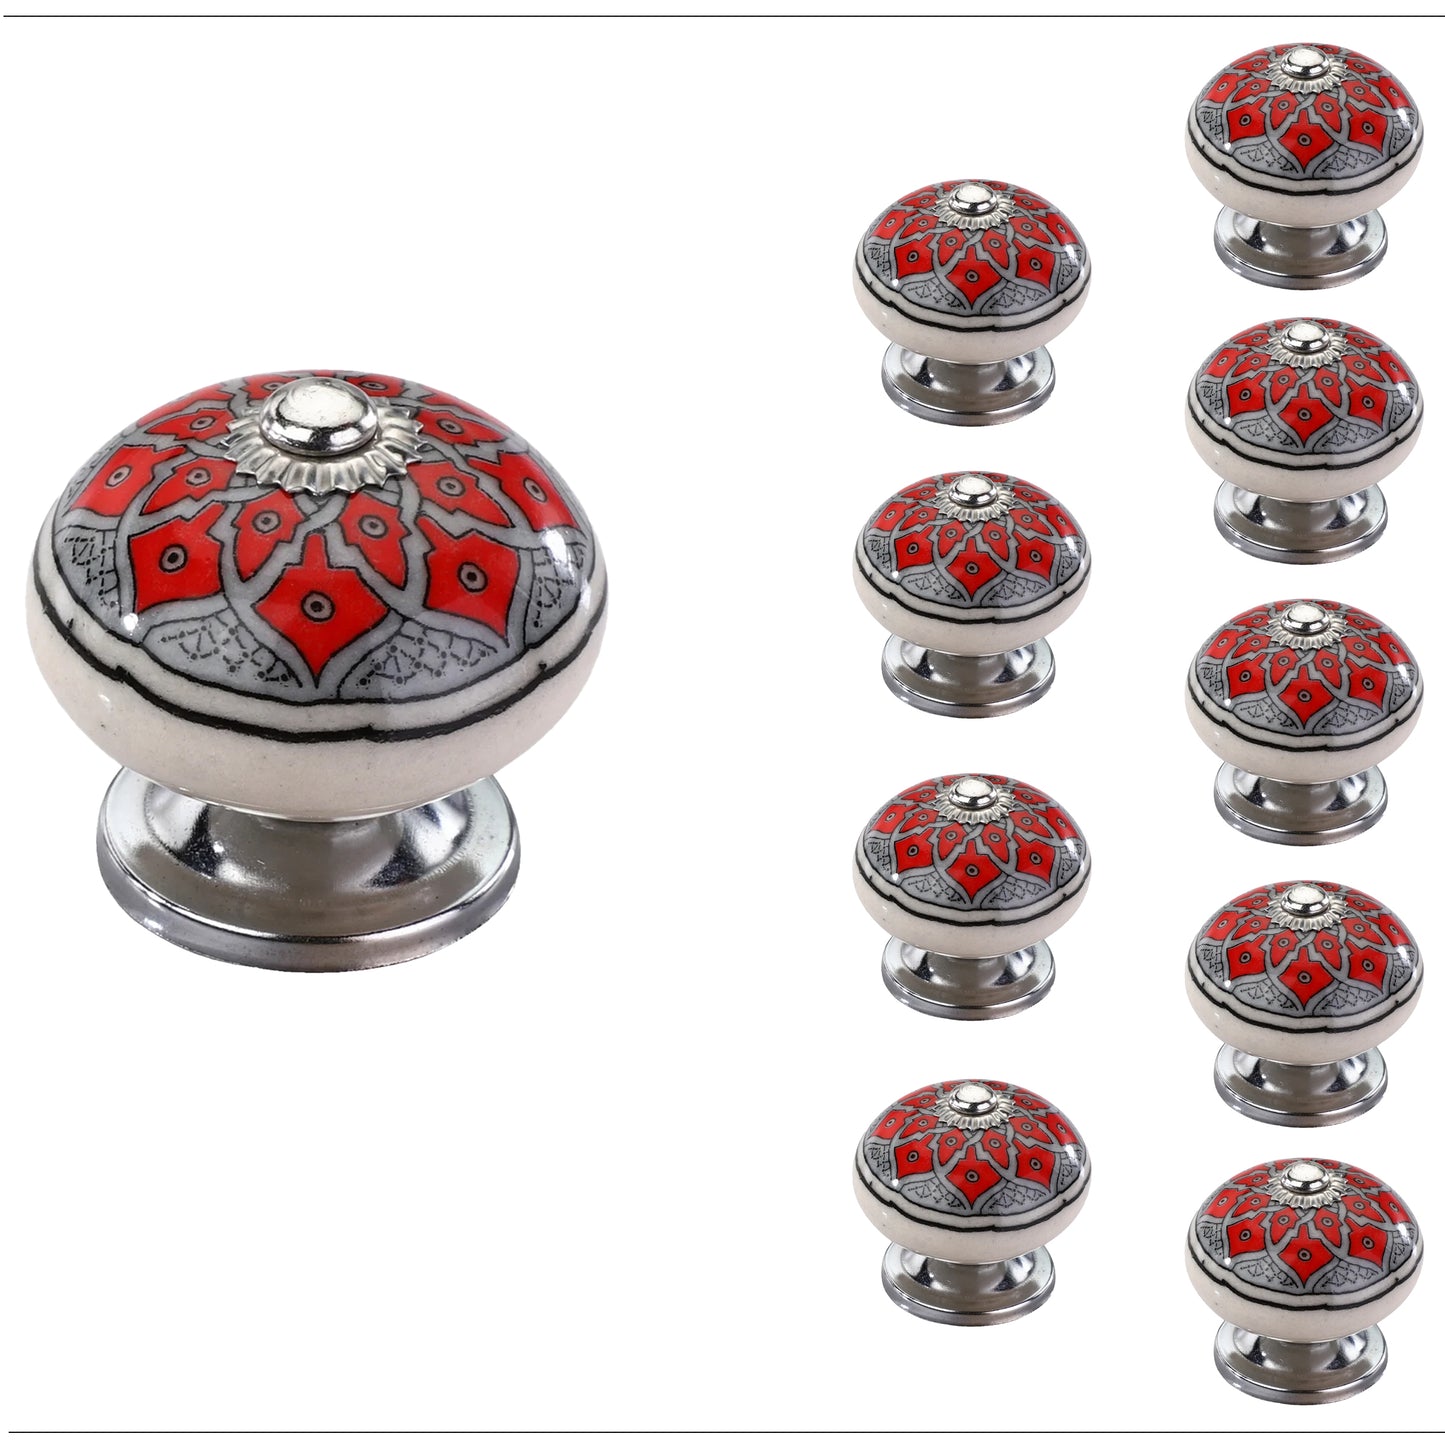 Mascot Hardware Botanical 1-3/5 in. Grey & Red Leaves Cabinet Knob (Pack of 10)